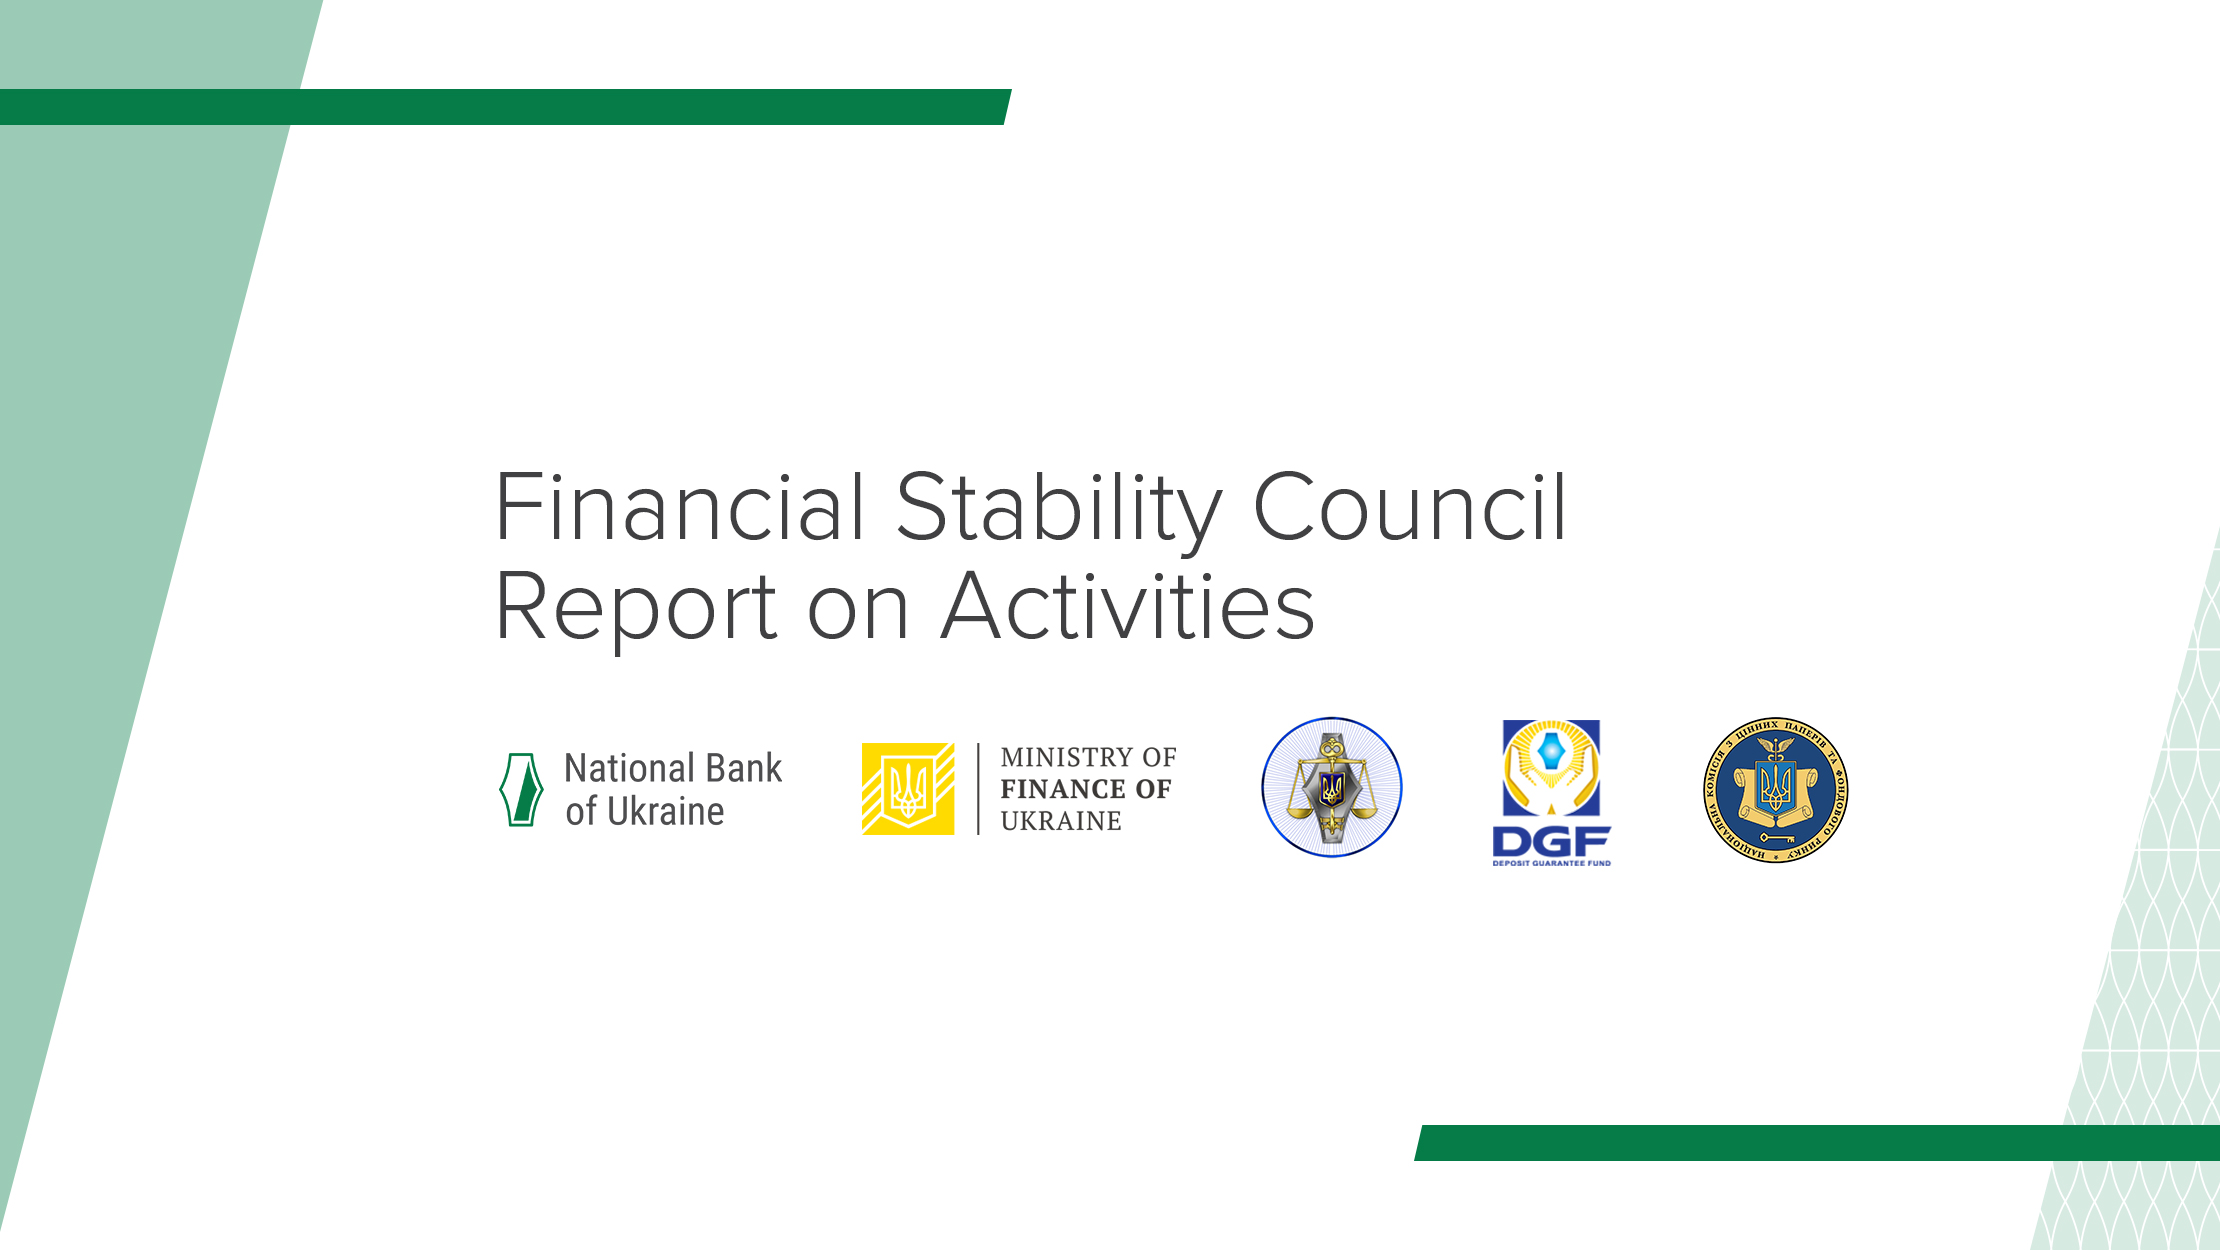 Financial Stability Council Report on Activities (June 2017 – July 2018)